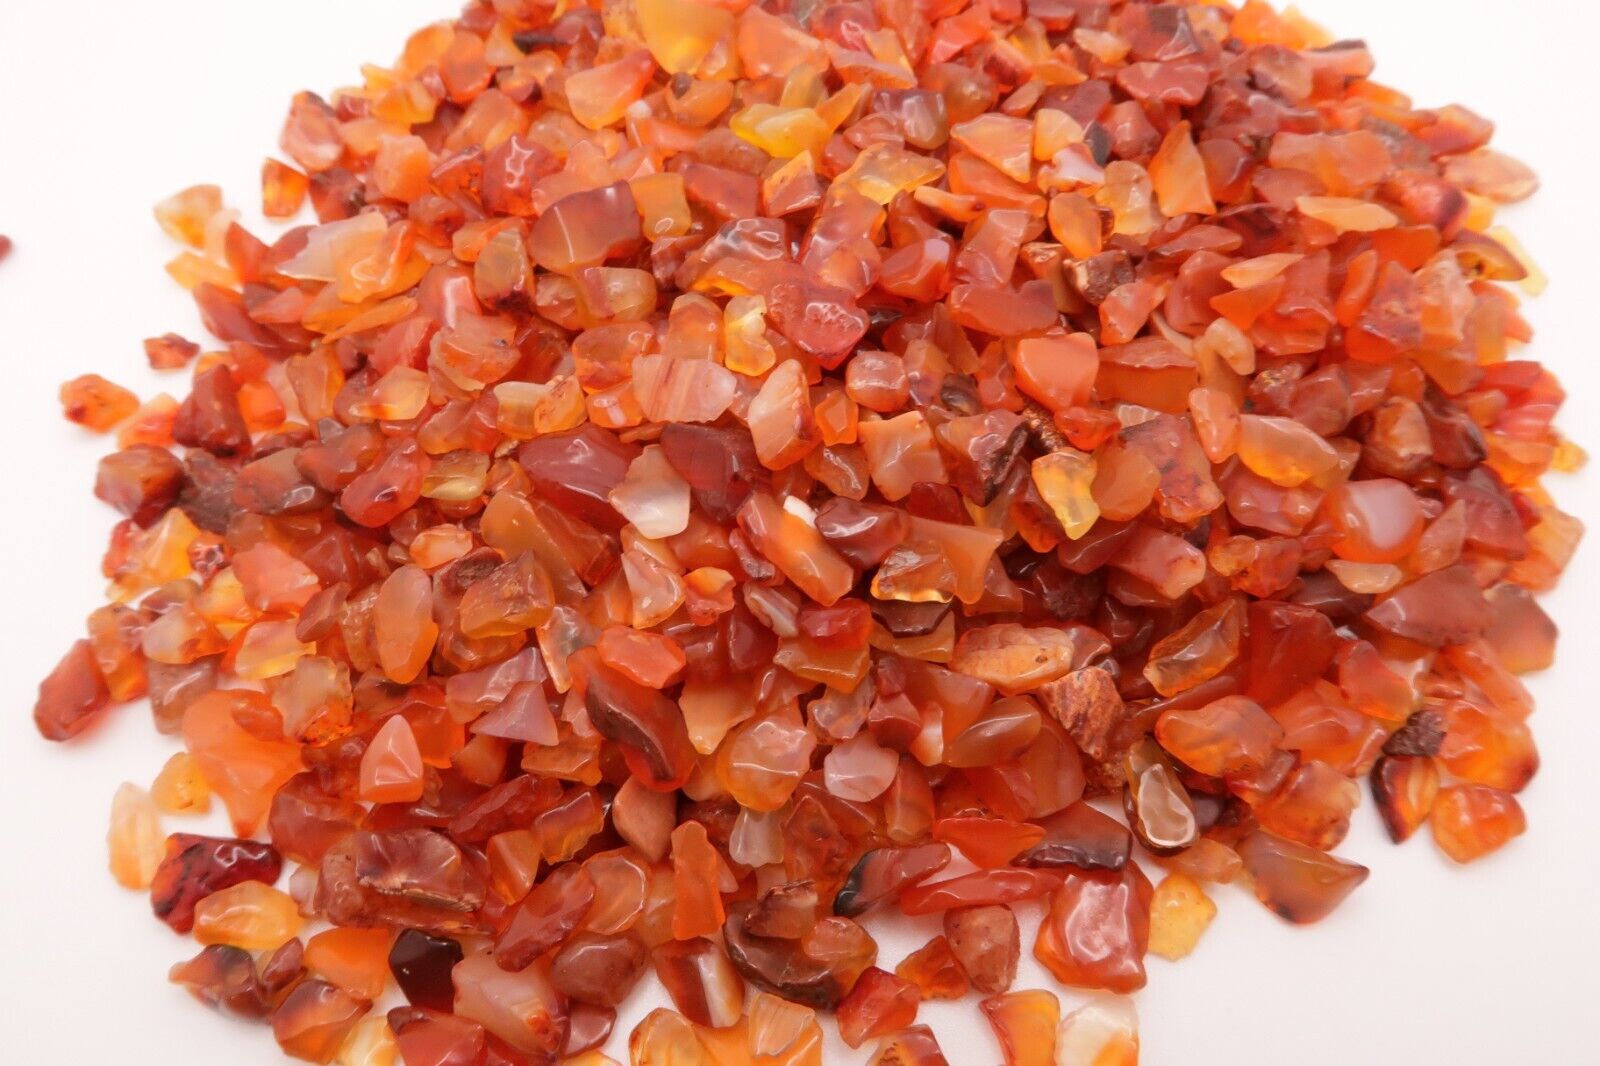 MINI POLISHED RED CARNELIAN CHIPS - 1 lb lot - Indian Carnelian - All Natural